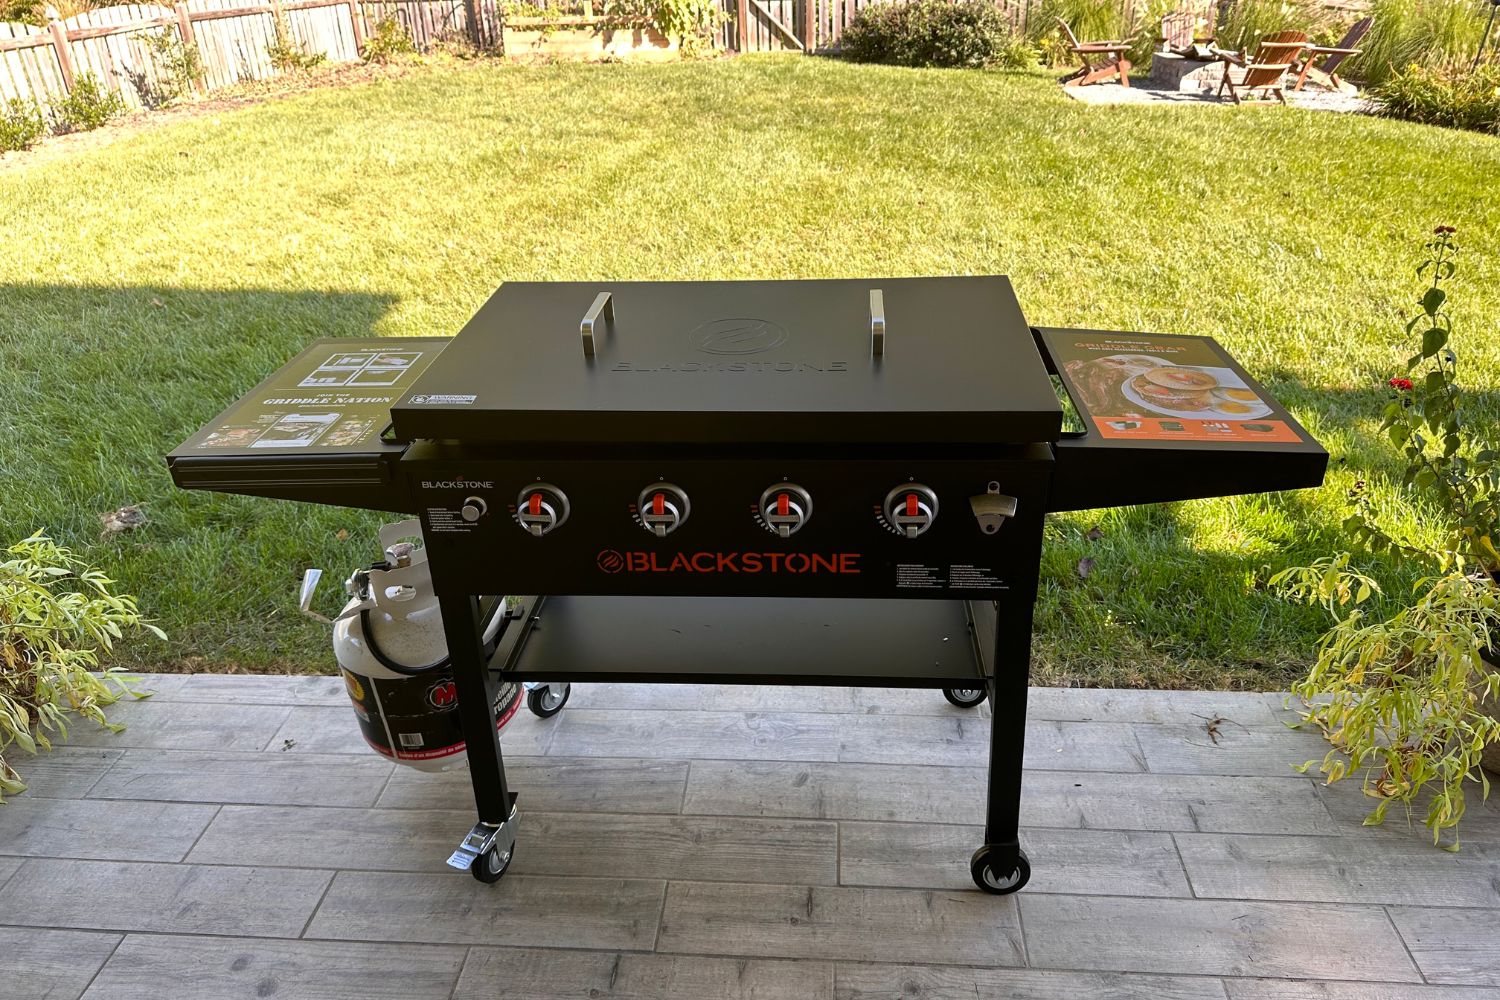 Blackstone 36-Inch Griddle with hard cover on stone patio in sunny backyard.